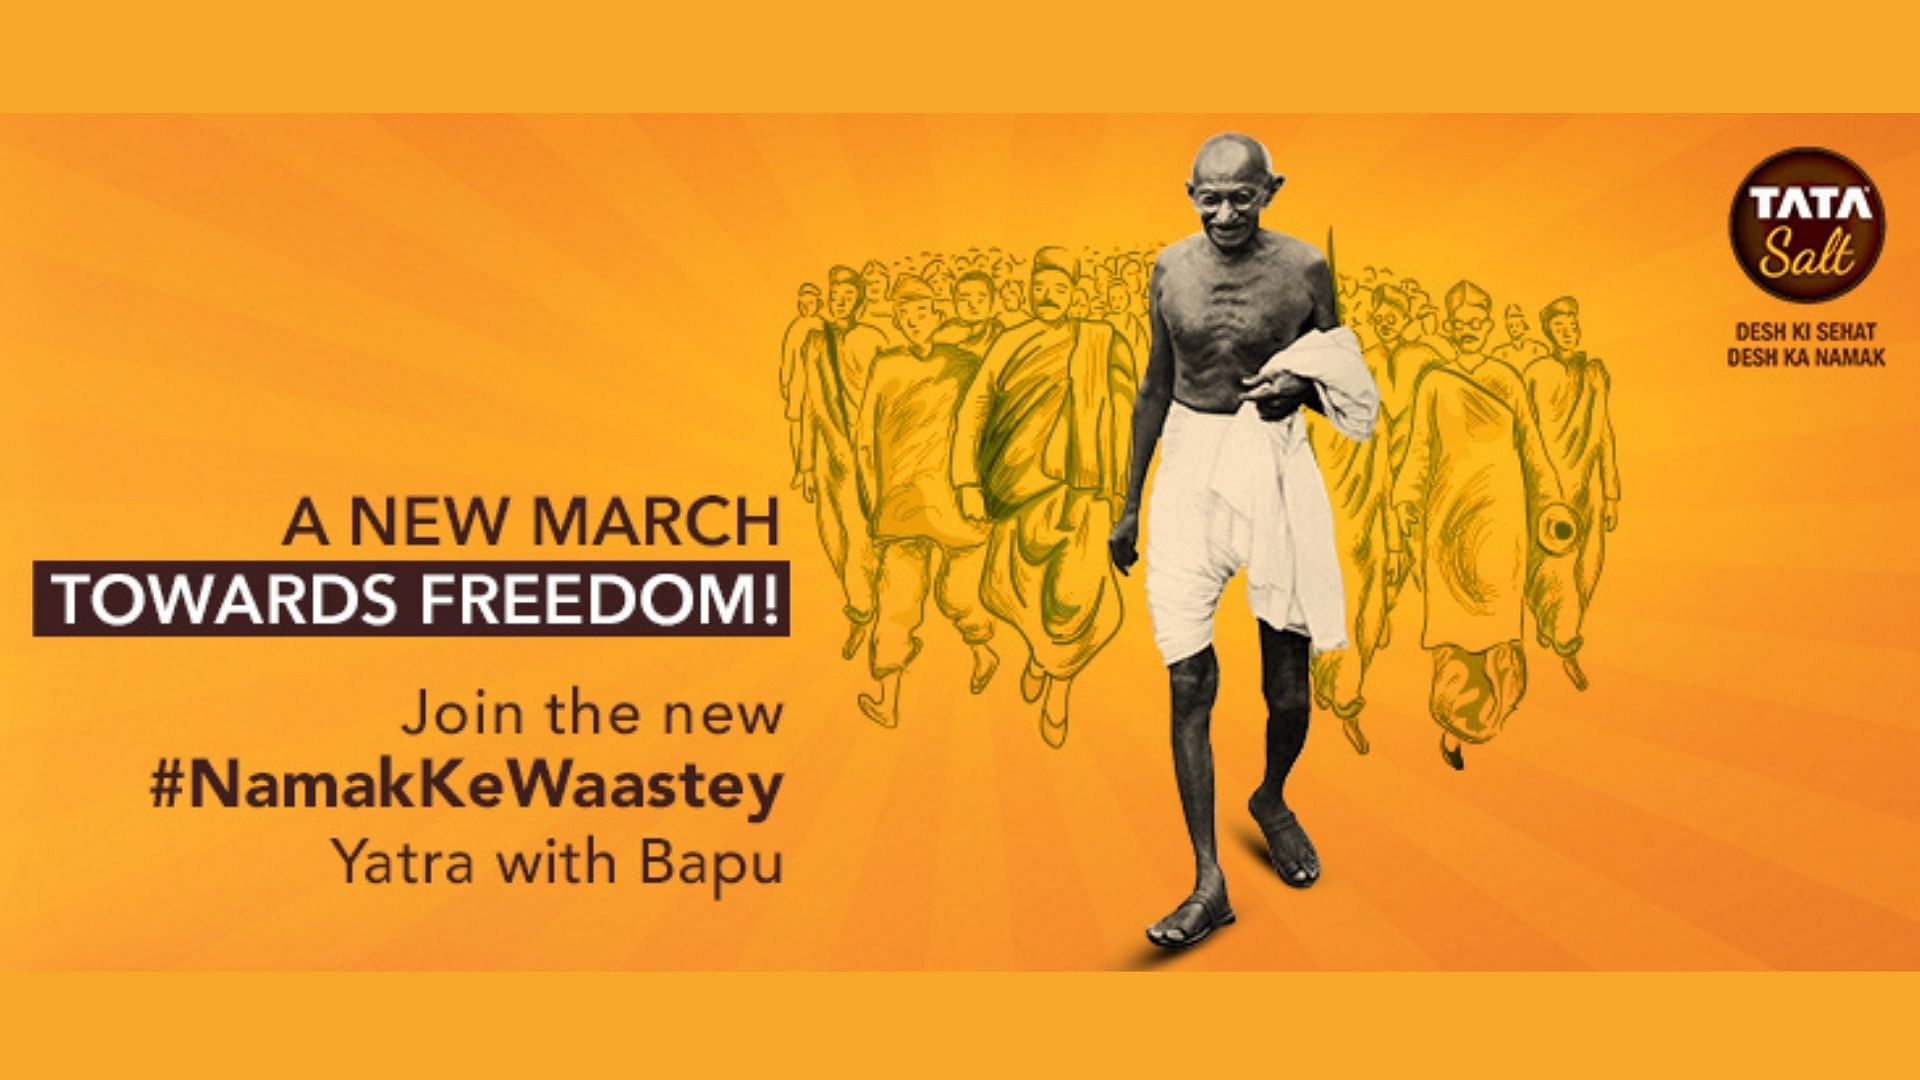 Tata Salt is urging Indians to invoke Gandhiji’s lessons once again and come together to fight COVID-19